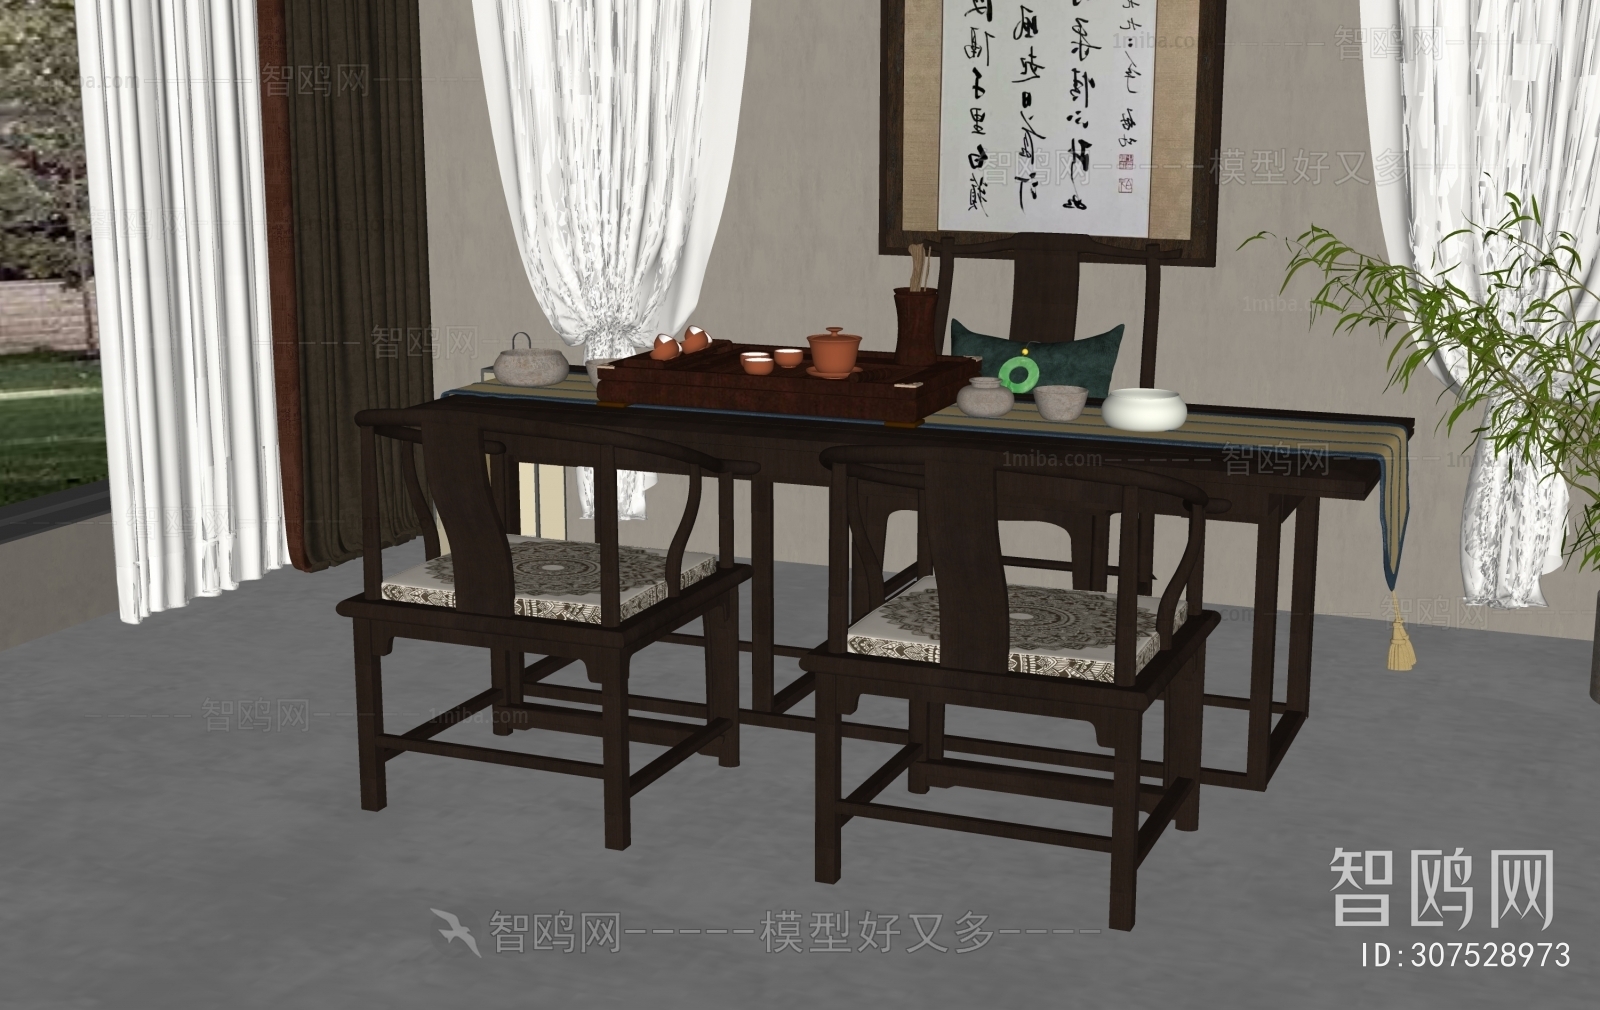 Chinese Style Tea Tables And Chairs